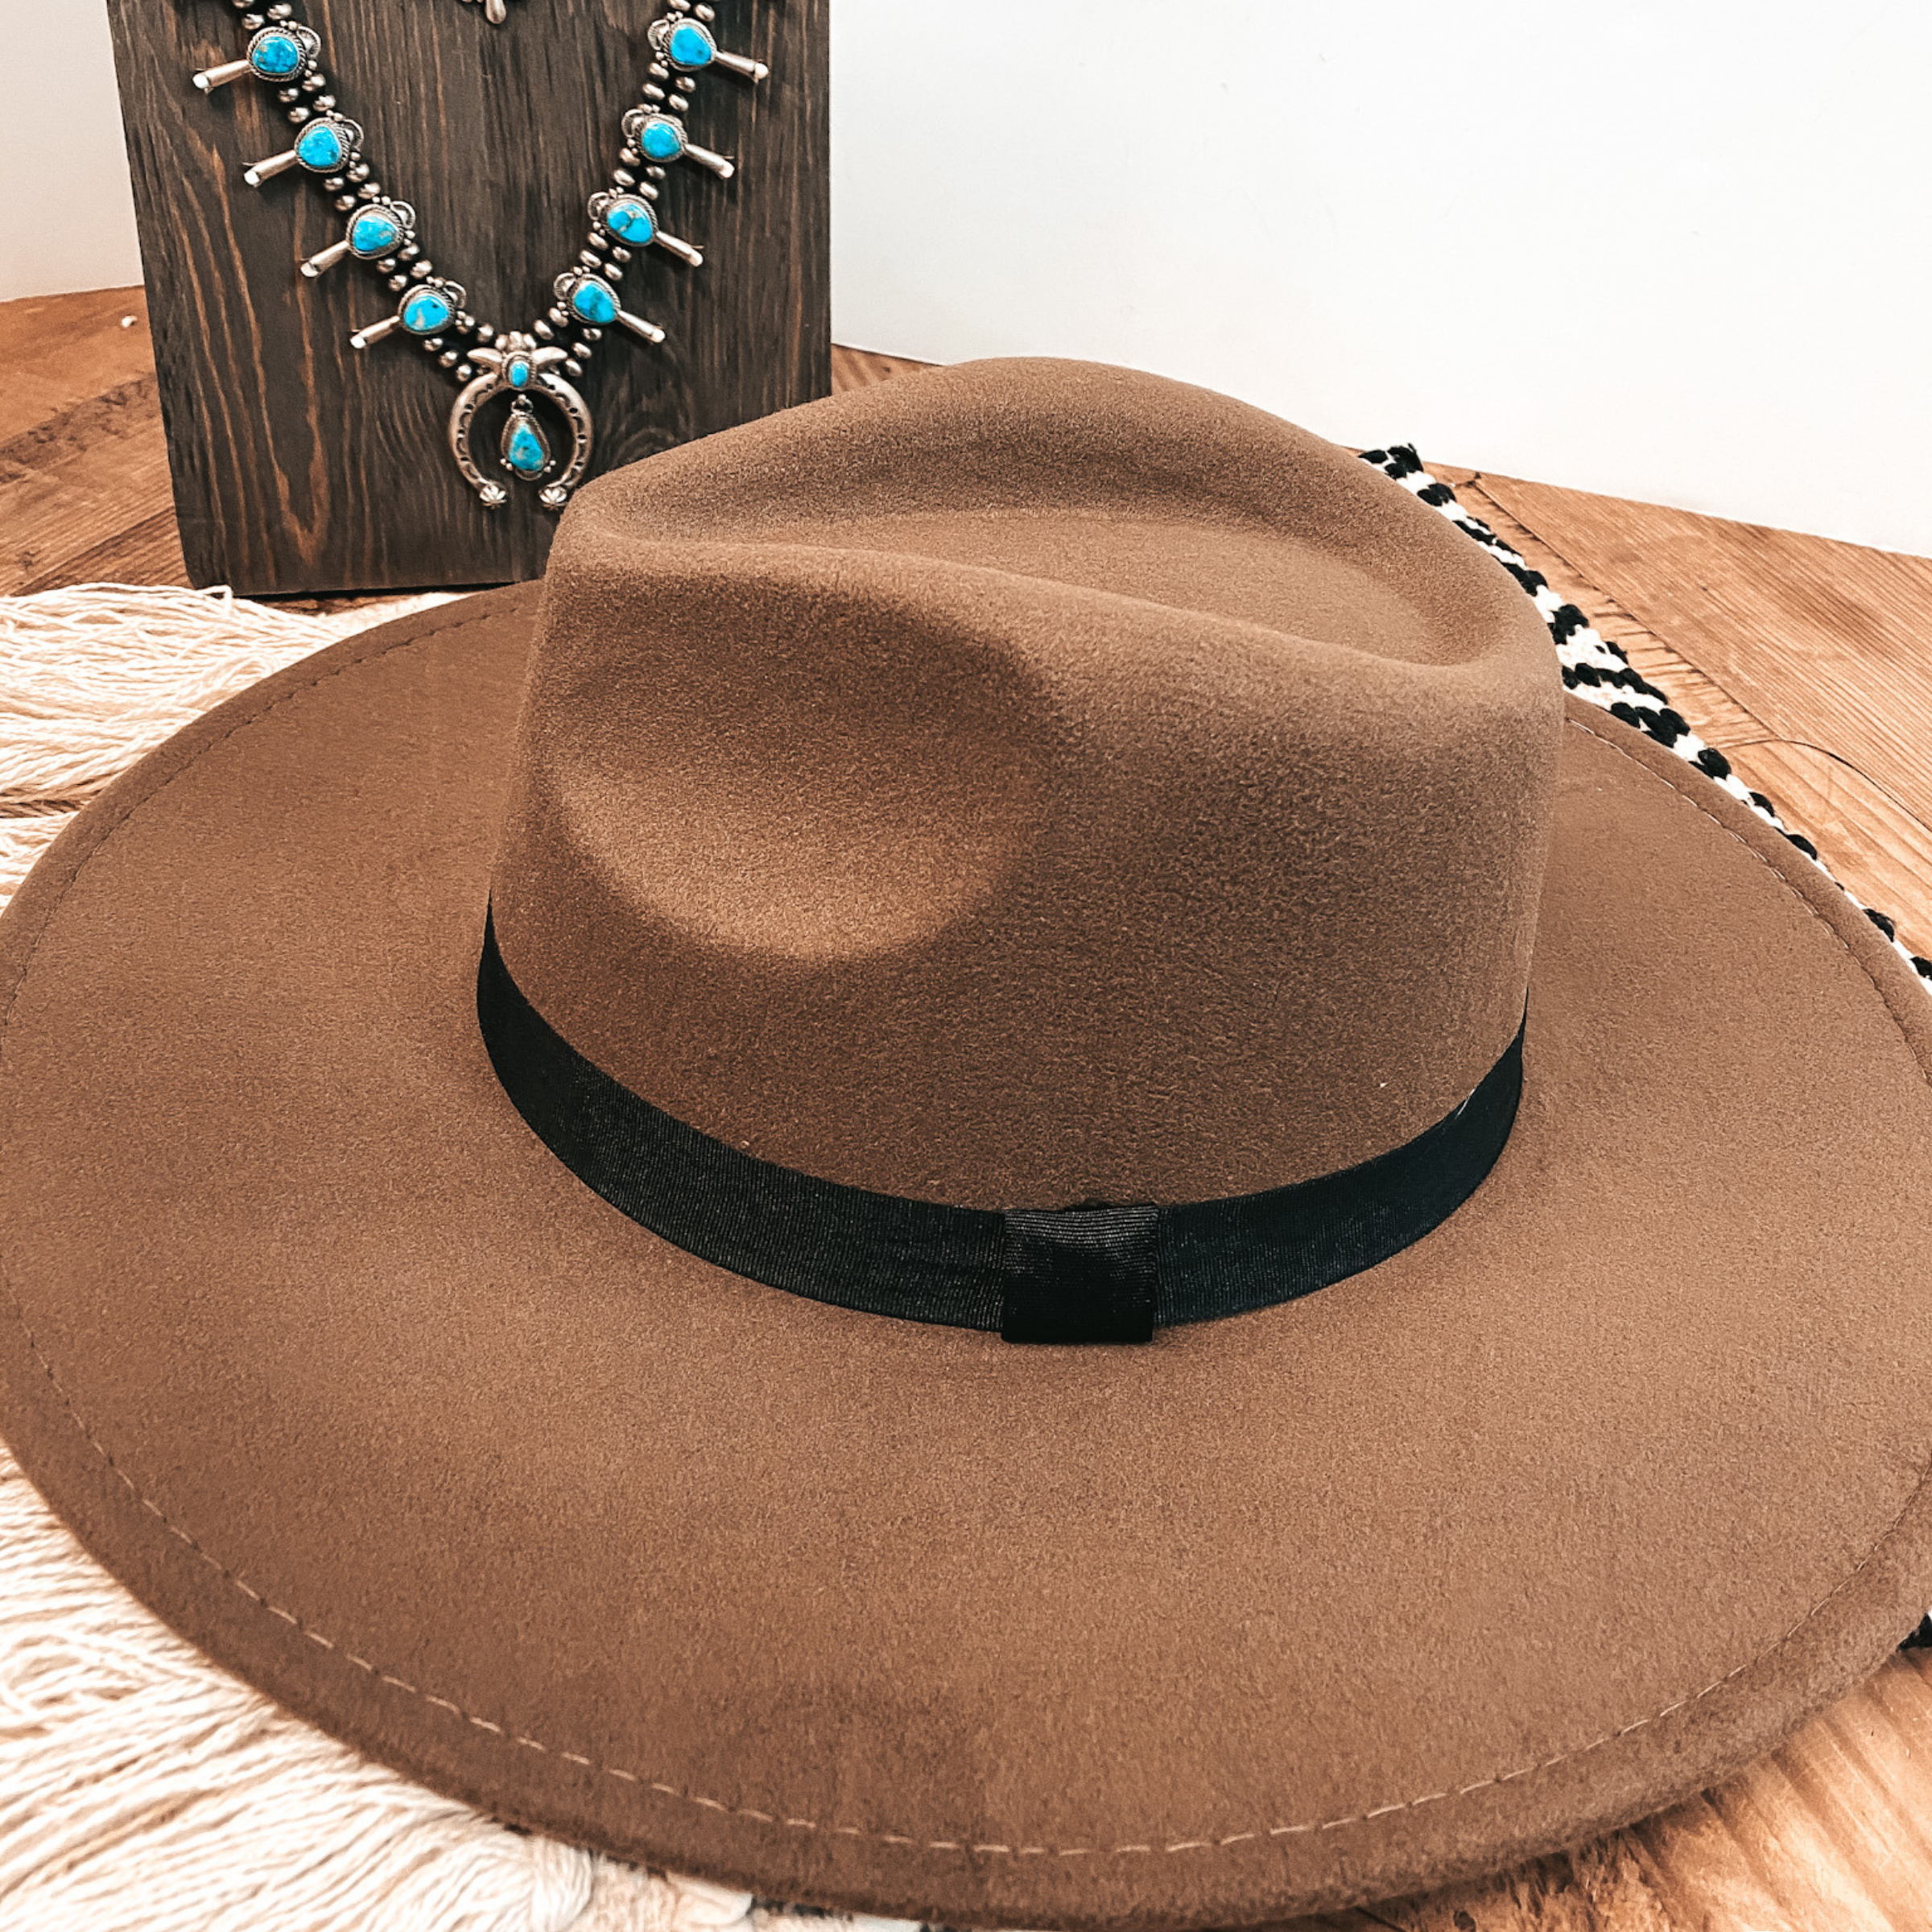 Gone for the Day Faux Felt Hat with Black Band in Chocolate Brown - Giddy Up Glamour Boutique